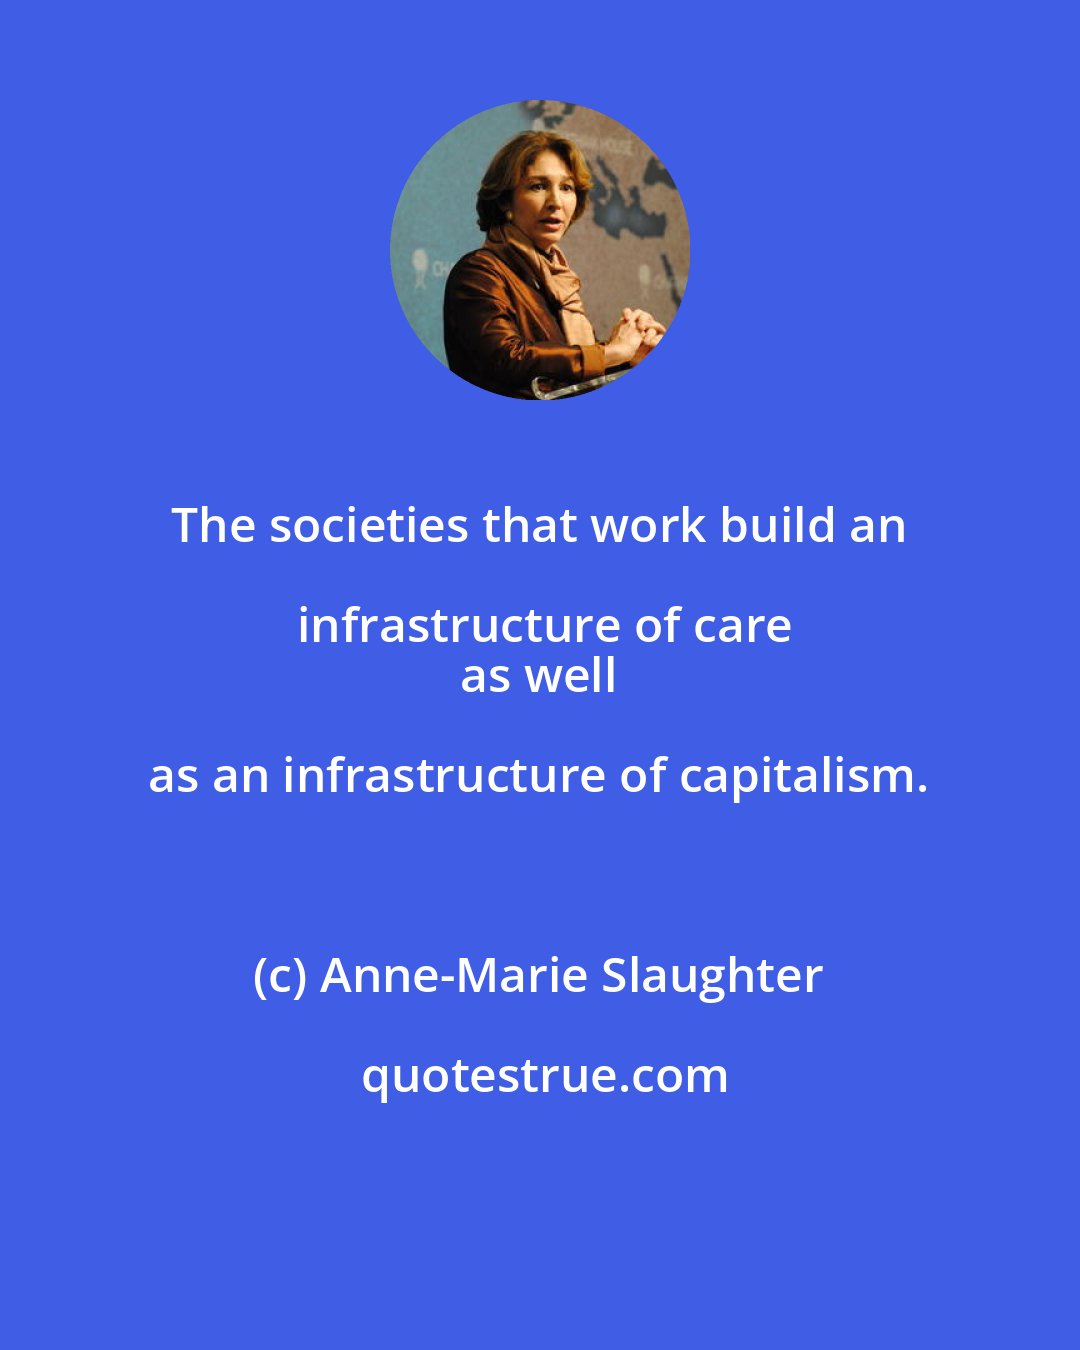 Anne-Marie Slaughter: The societies that work build an infrastructure of care
 as well as an infrastructure of capitalism.